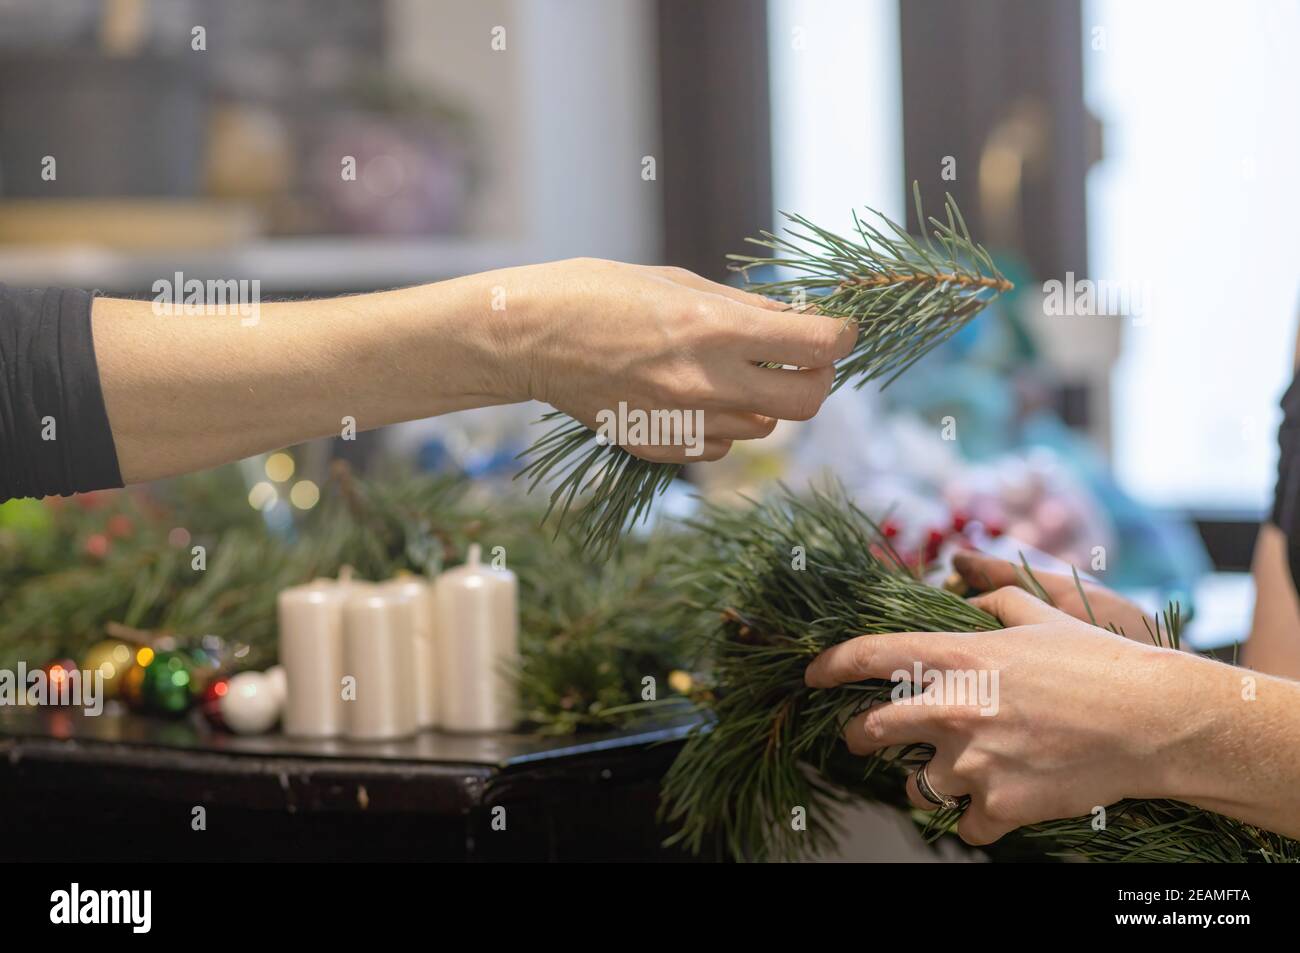 Woman's hand gives a pine twig to another woman who is preparing Christmas decorations Stock Photo